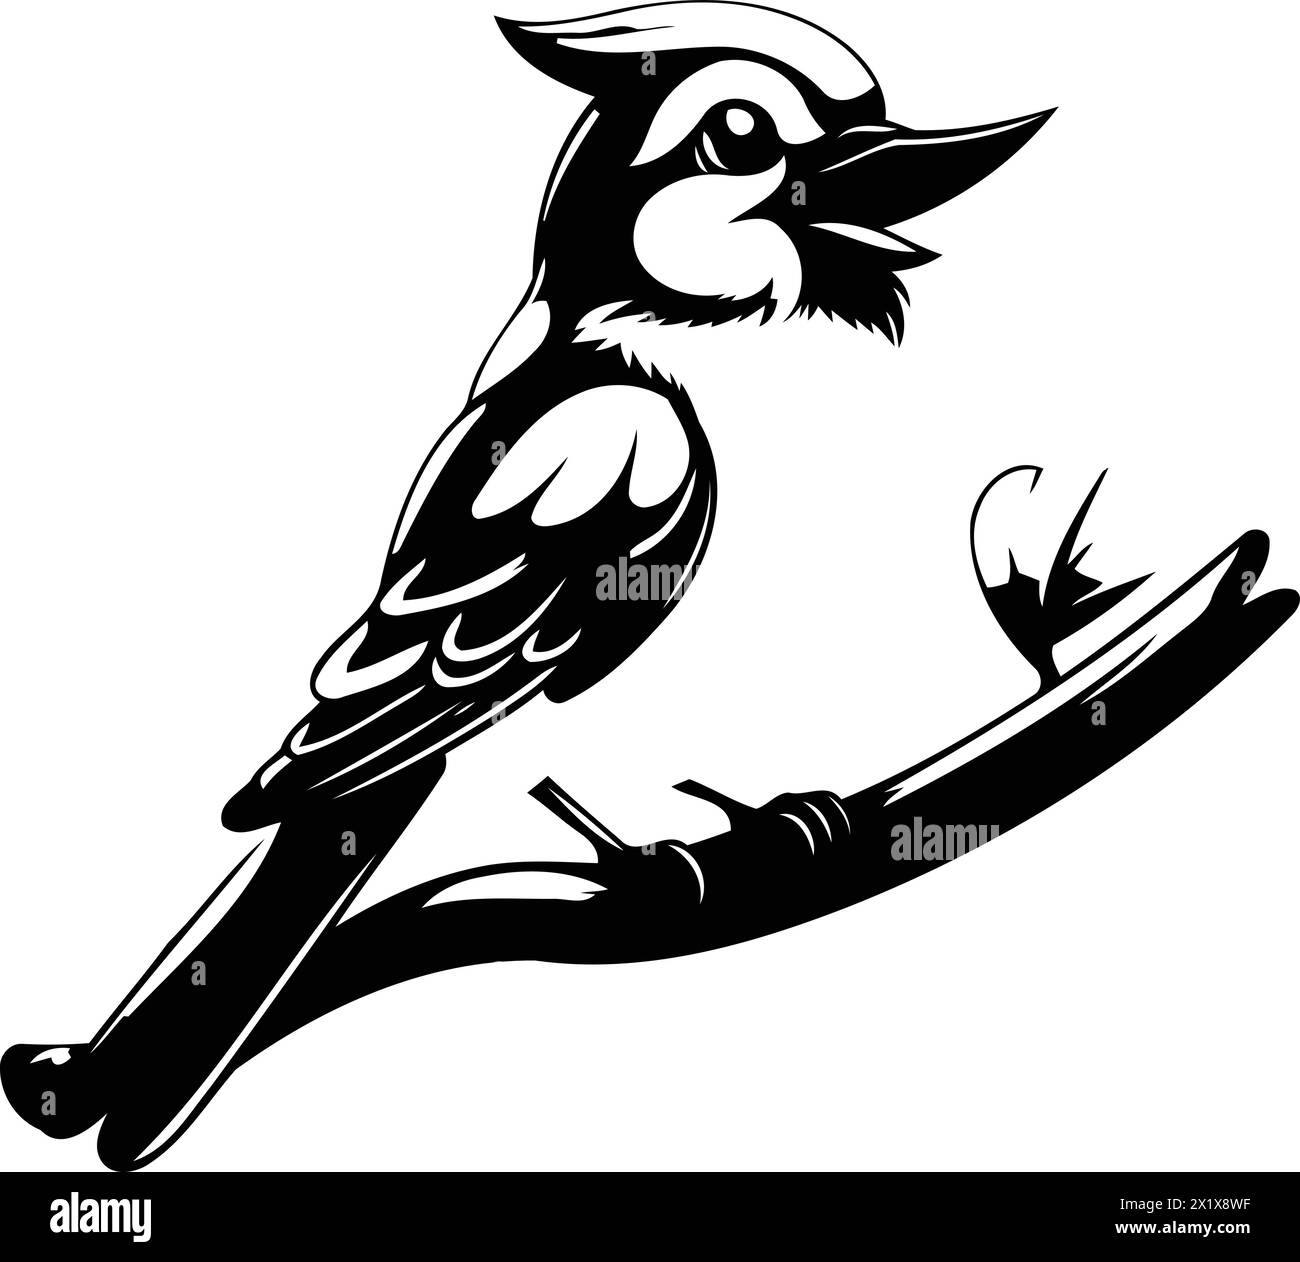 Blue jay bird sitting on a branch isolated on white background. Vector illustration. Stock Vector